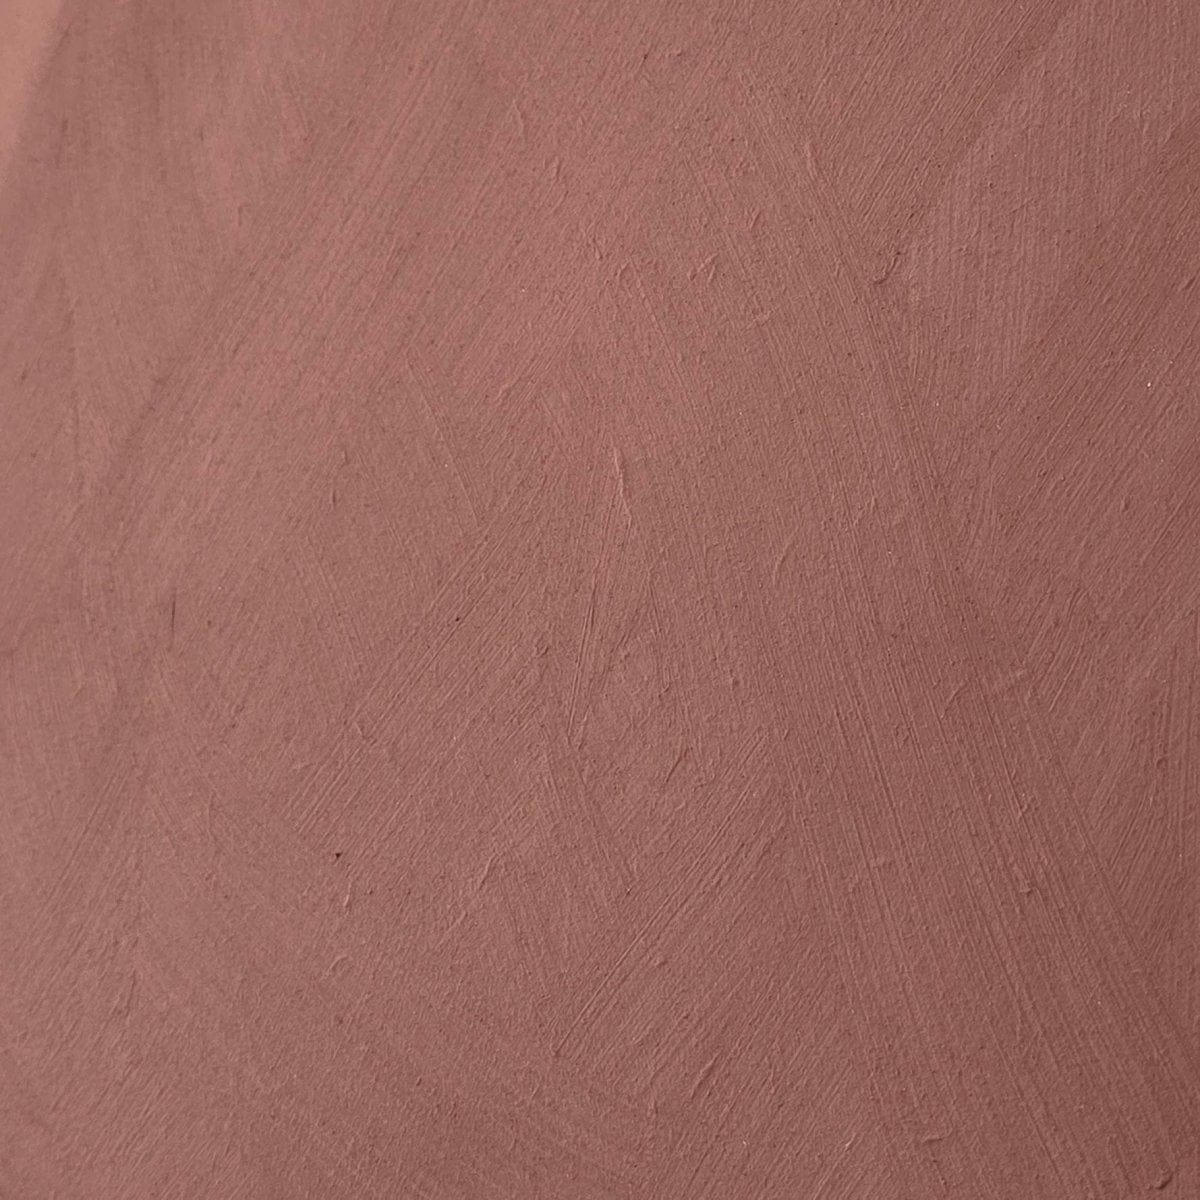 Montagna Rossa - Brown-Red Limewash Wall Paint